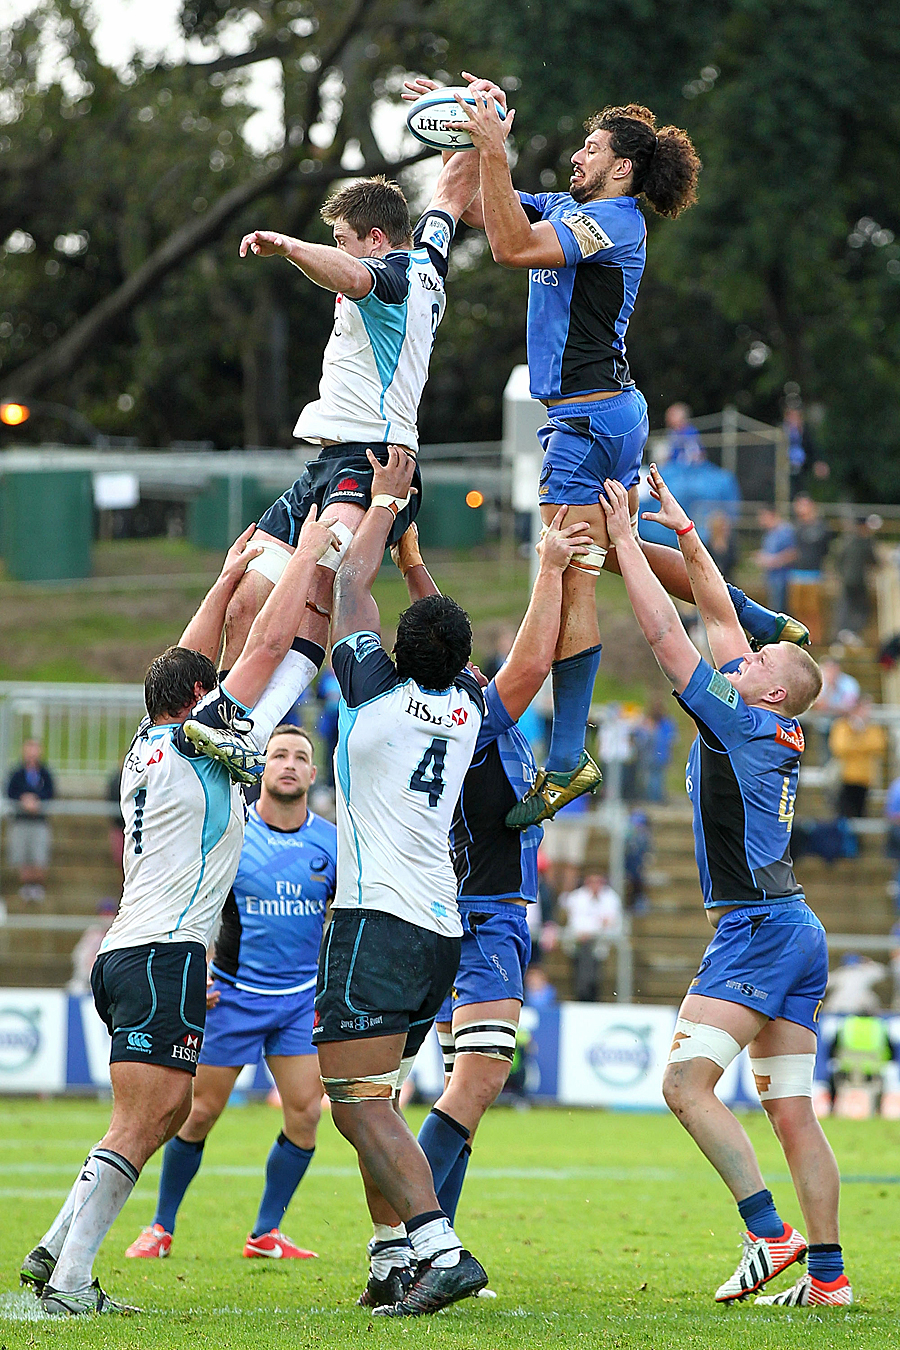 The Force's Sam Wykes takes a lineout